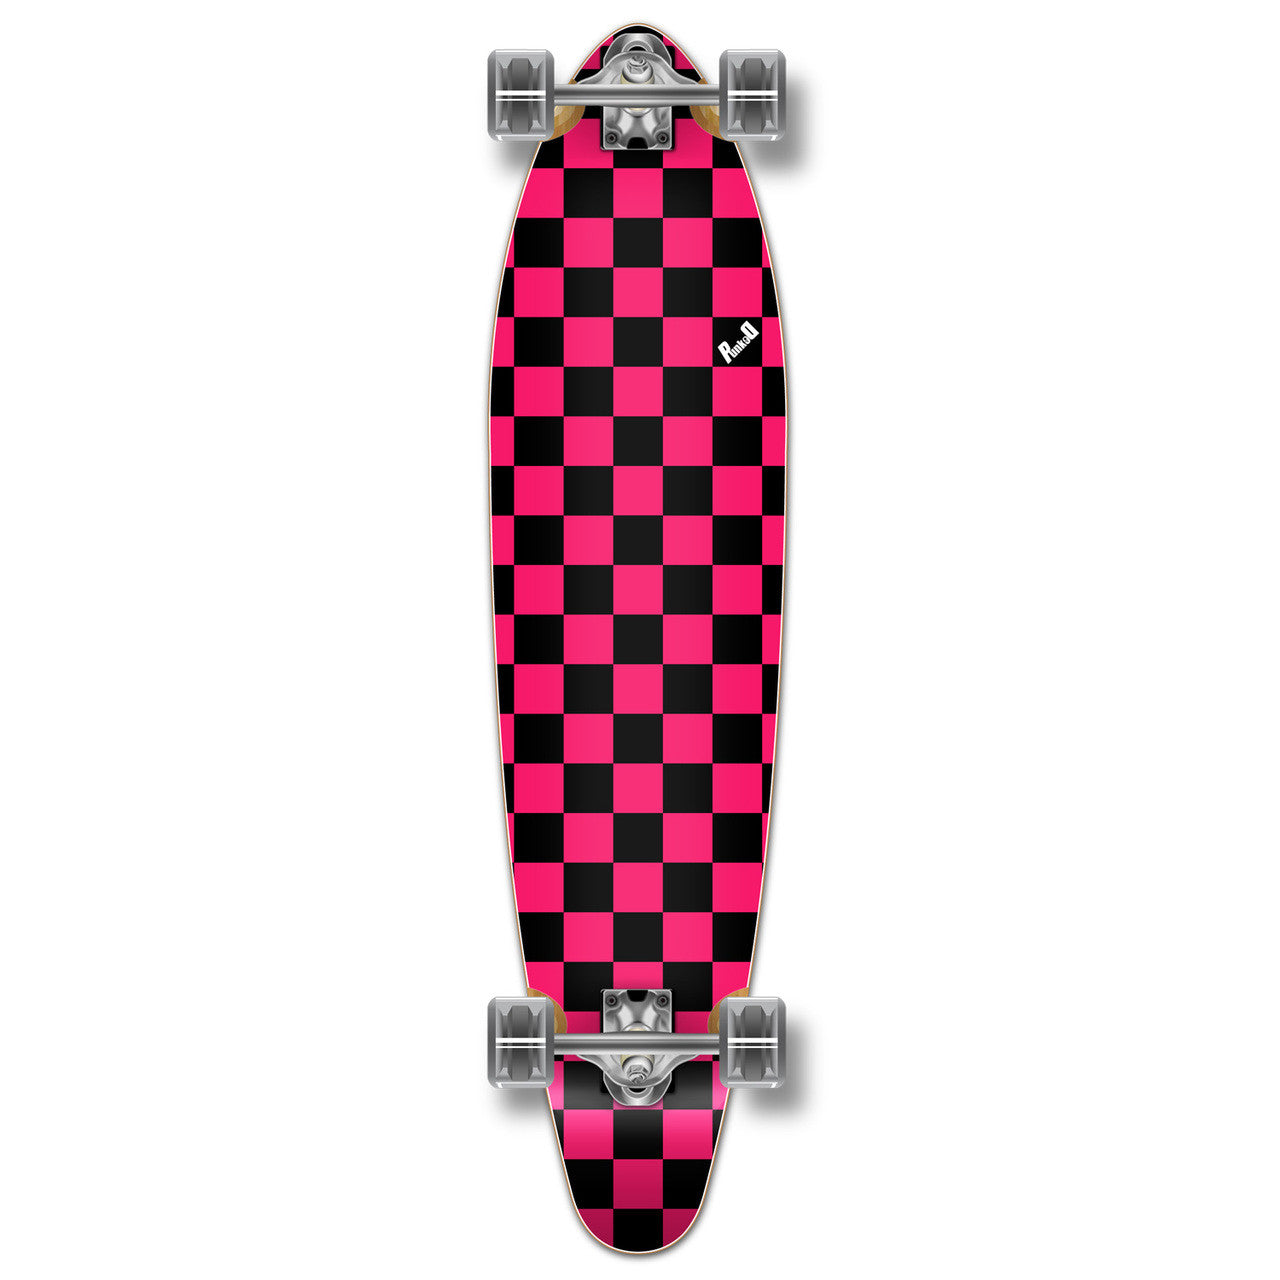 Yocaher Kicktail Longboard Complete - Checker Pink